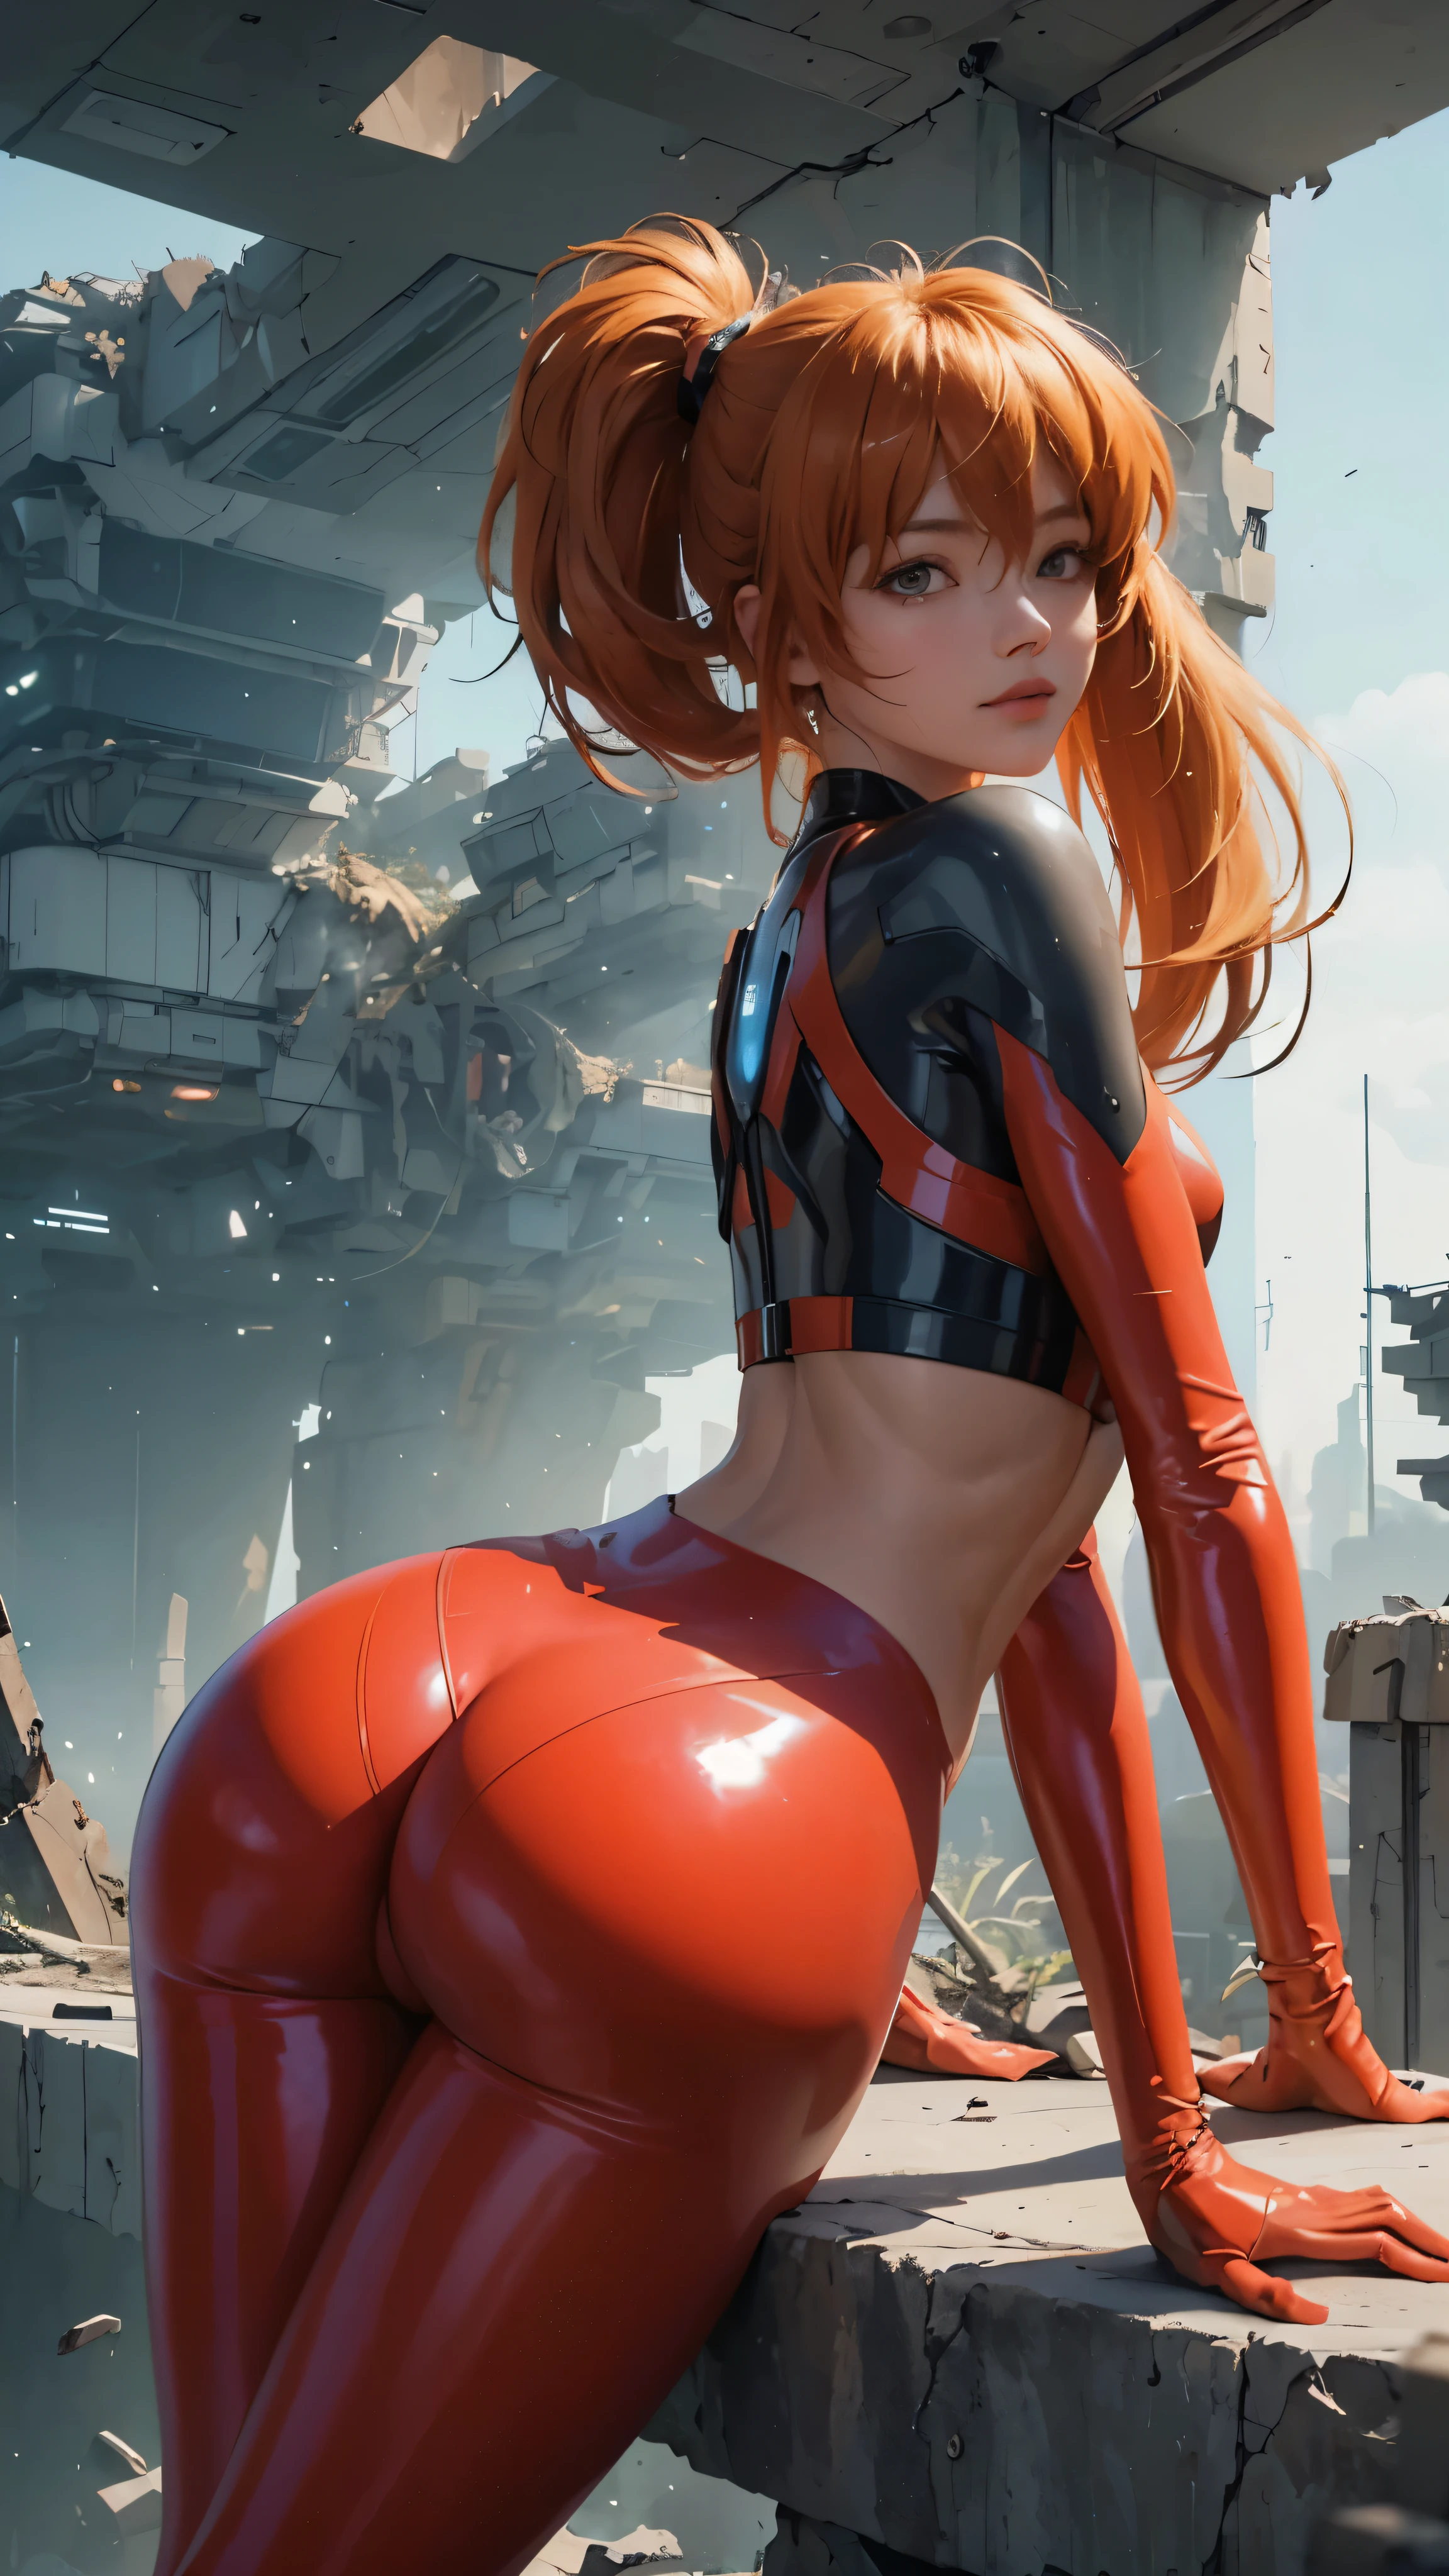 1 girl, ((Asuka langley shikinamy)), (((Red latex tight pants))), We see her, He's taking off his pants, leaning over a desk, Perfectoo, She opens her, ASS, ((The light comes from below) ), ((Lighting comes from the ground)), ((Beautiful shape of ass)), ((orange hair)), ((Best quality)), ( (Masterpiece) ), (Highly detailed:1.3 ), splendid, (cyberpunk:1.3) (NSFW 1.3), ((naked))) ((Perfect ass, perfect buttoks)) ((ass view)) (((Pura Pantyhouse))), (godpussy), real life, HDR (High Dymanic Range), Ray tracing, NVIDIA RTX, Super resolution, Unreal 5, Sub-Surface Scatterring, PBR textures, Post processing, Anisotropic filtering, Depth of field, High sharpness and sharpness, Multi-layer textures, Albedo and specular mapping, Surface shading, Precise simulation of light-material interactions, Perfect proportions, Octane rendering, duotone lighting, Low ISO, white balance, Rule of thirds, Wide aperture , 8K RAW, high-efficiency subpixels, sub-pixel convolution, glow particles, (background(futuristic shipyard in ruins):1.3), daylight, bent over, smiling, (((close up)))